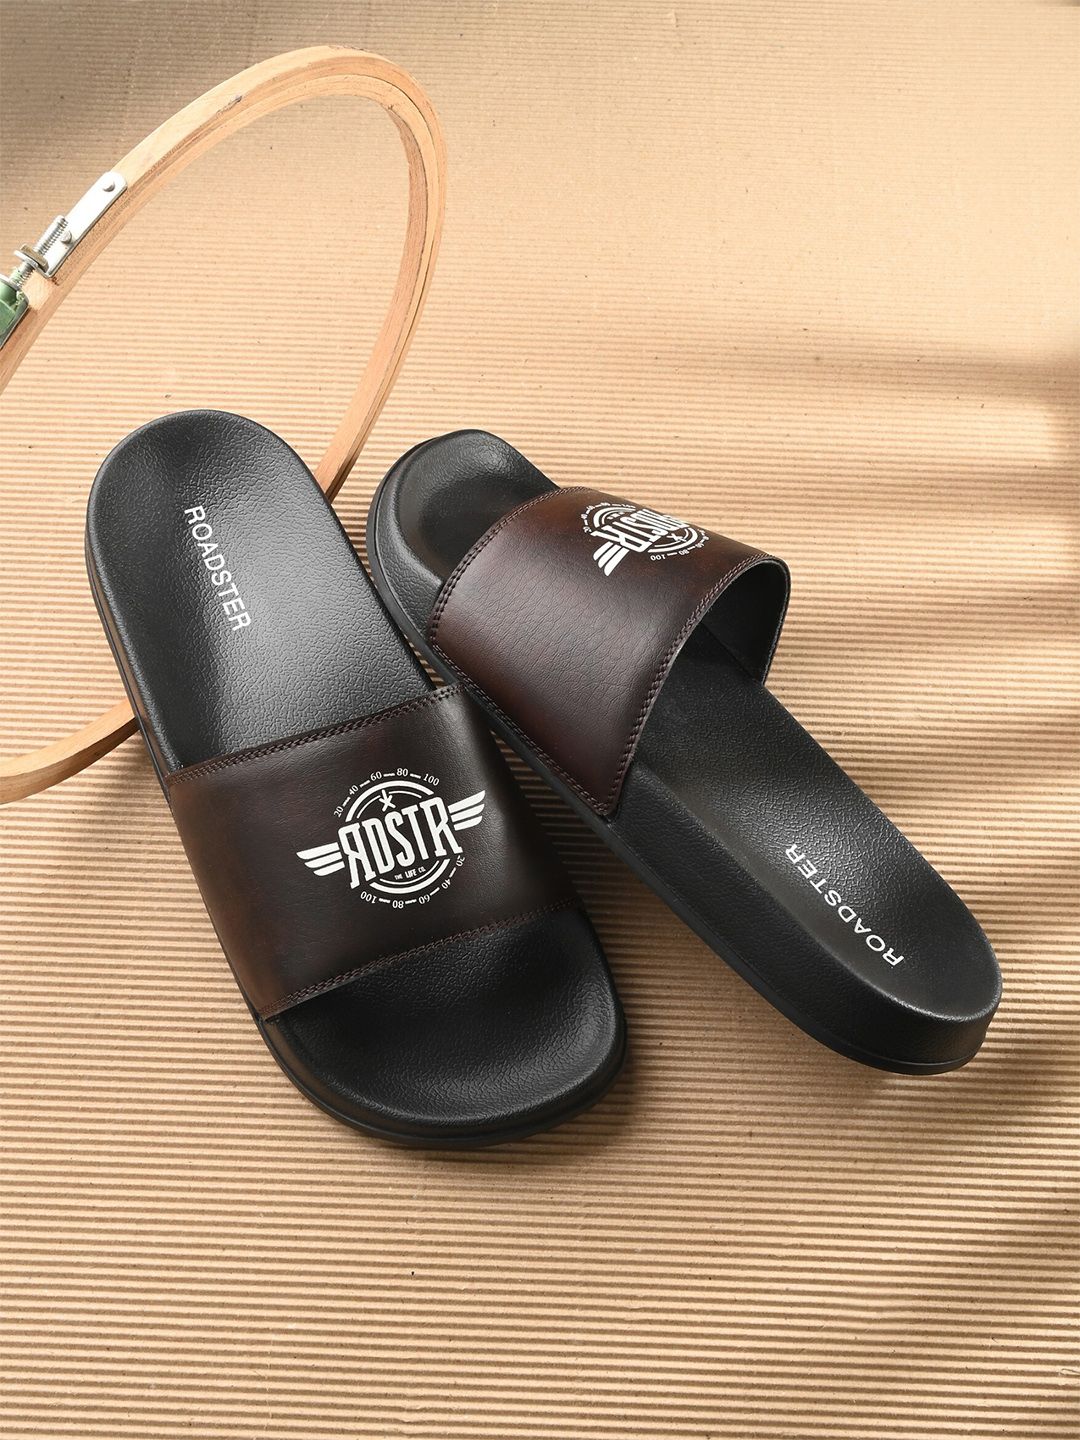 Roadster The Lifestyle Co. Men Typography Printed Sliders